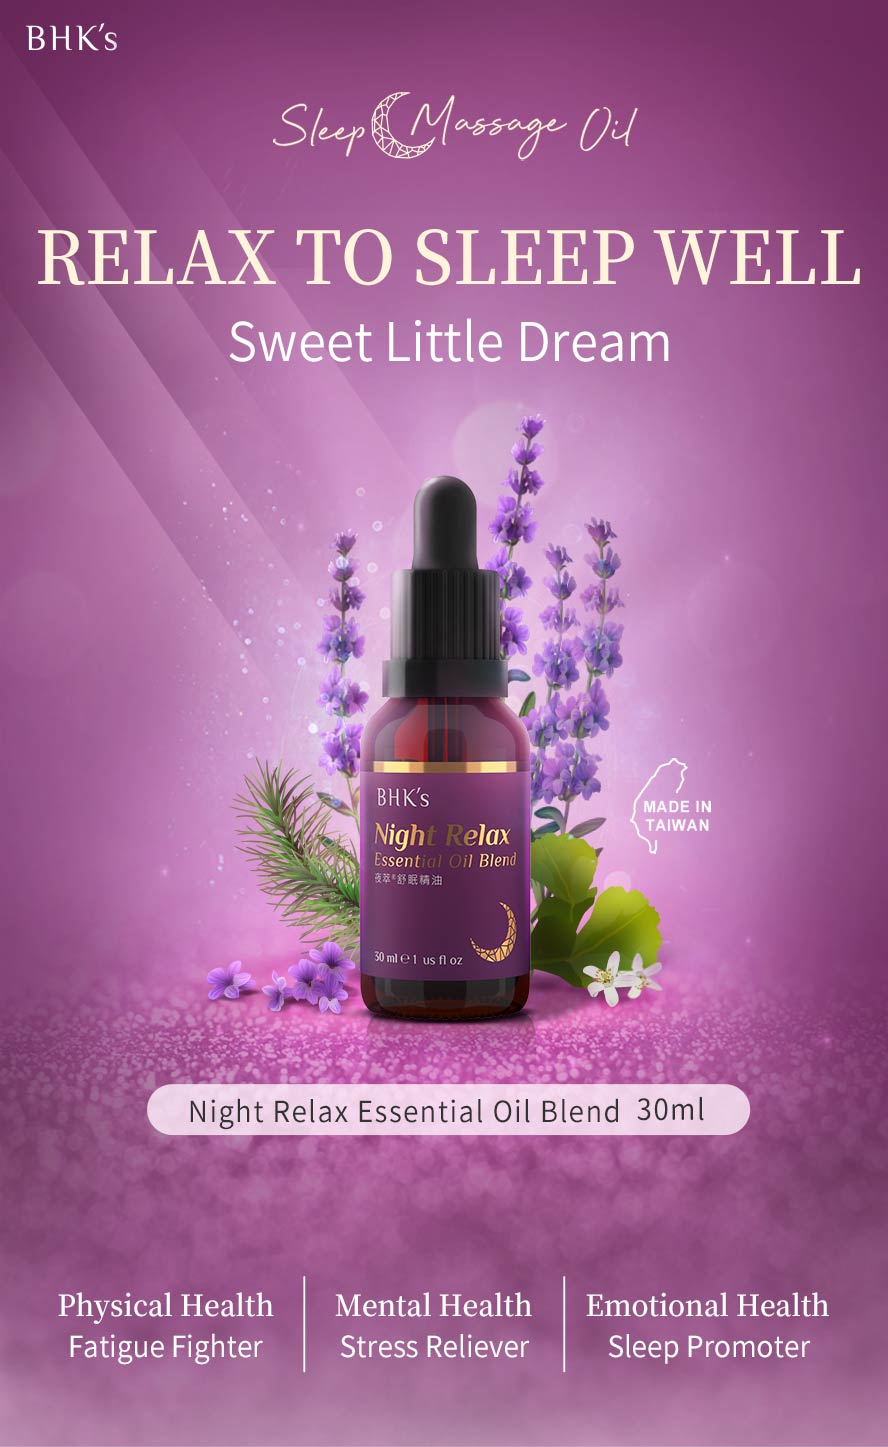 Night relax essential oil with lavender is suitable for massage, to help you release stress, relax mood, eliminate fatigue, and sleep well